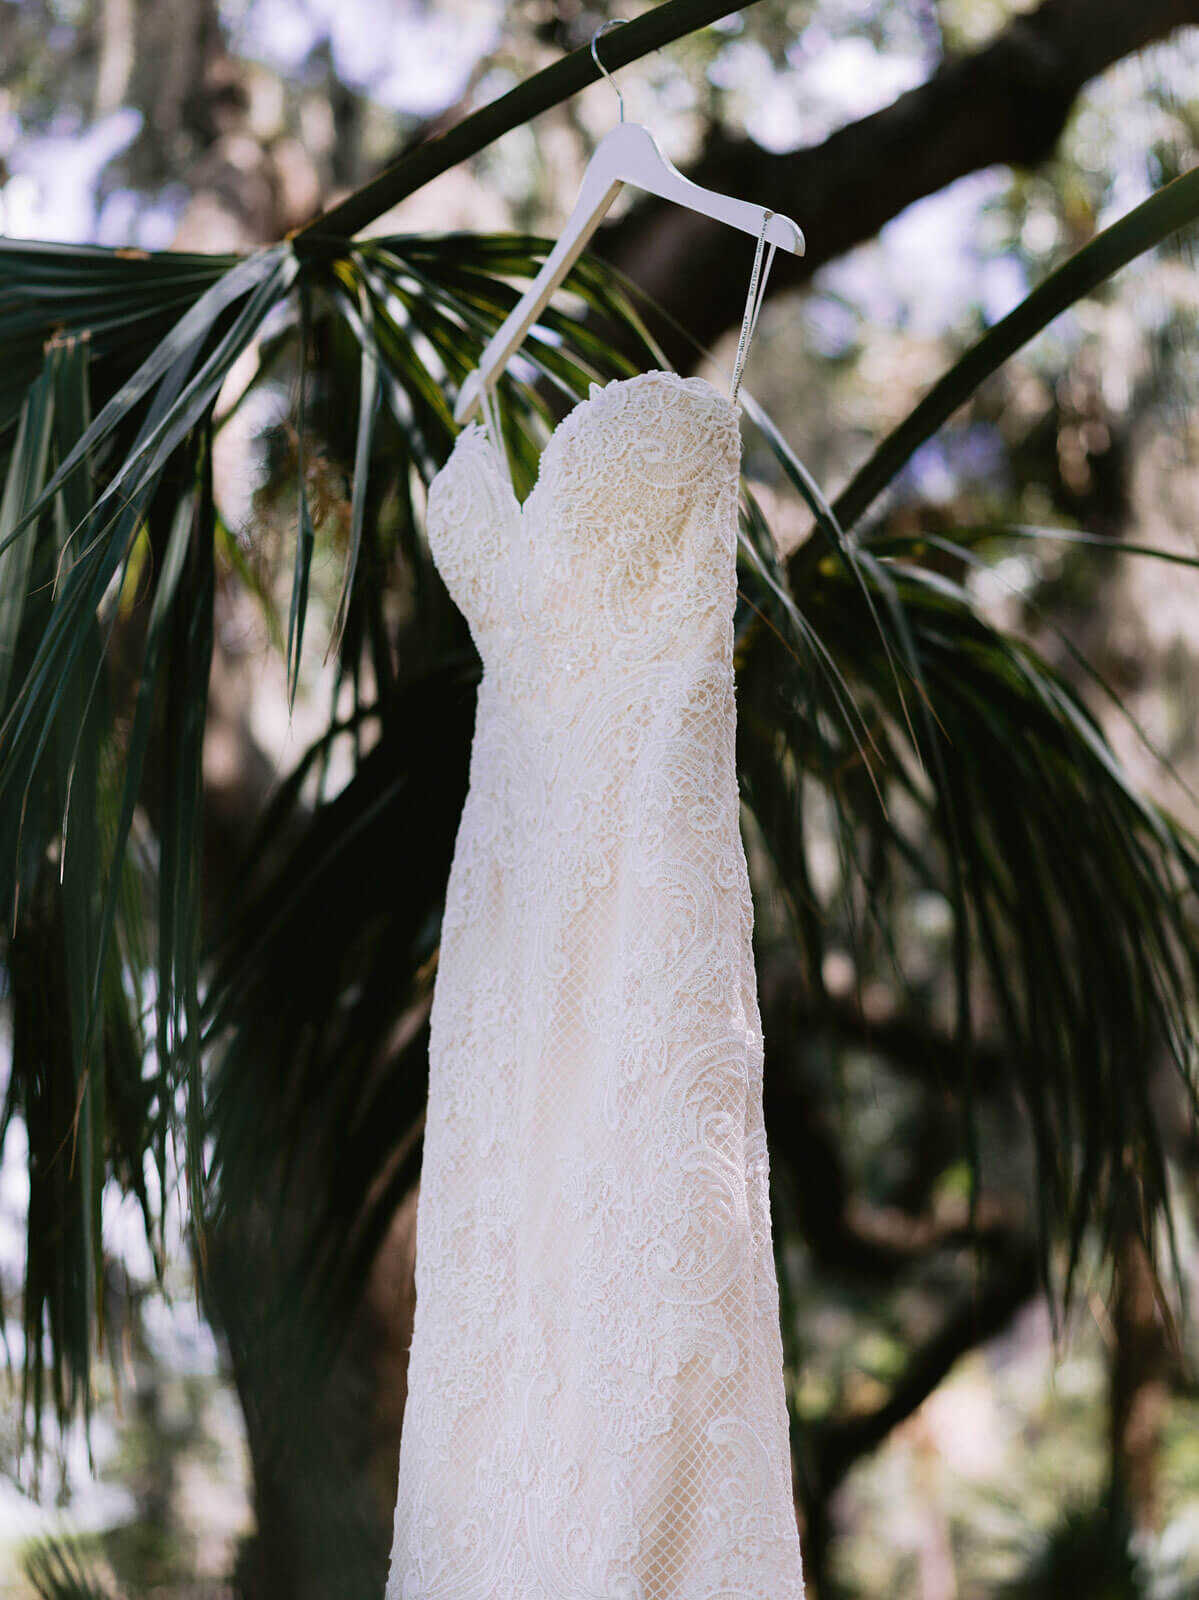 A beautiful wedding gown on a hanger, hung in a tree in Montage at Palmetto Bluff. Destination wedding image by Jenny Fu Studio